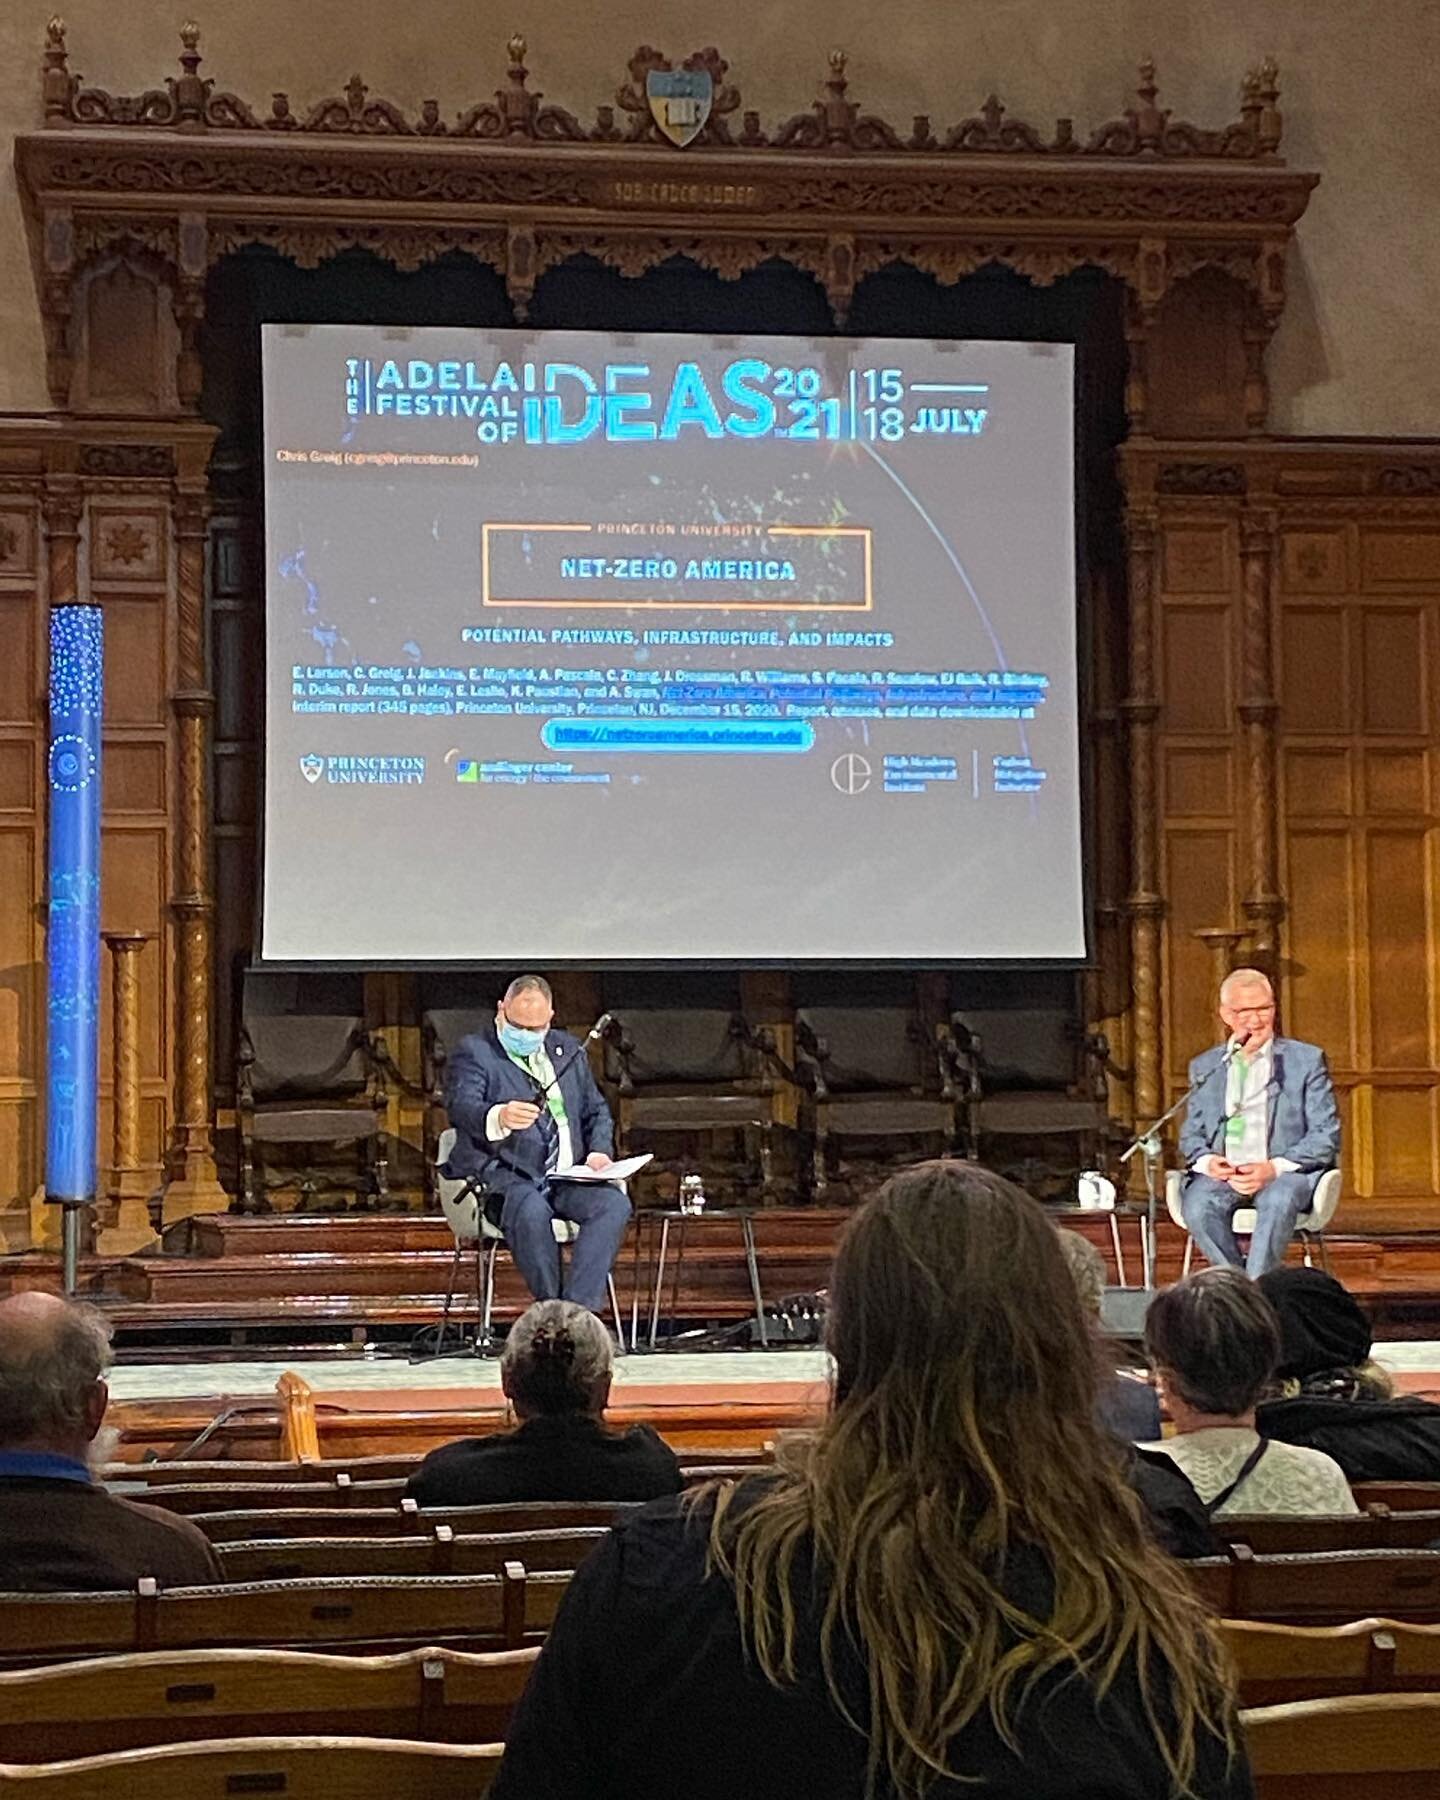 Troppo team catching Net Zero America session with Australian Dr Chris Greig at illuminate Adealide -Festival of Ideas

A ground-breaking study of decarbonisation pathways for the US &ndash; Net-Zero America: Potential Pathways, Infrastructure and Im